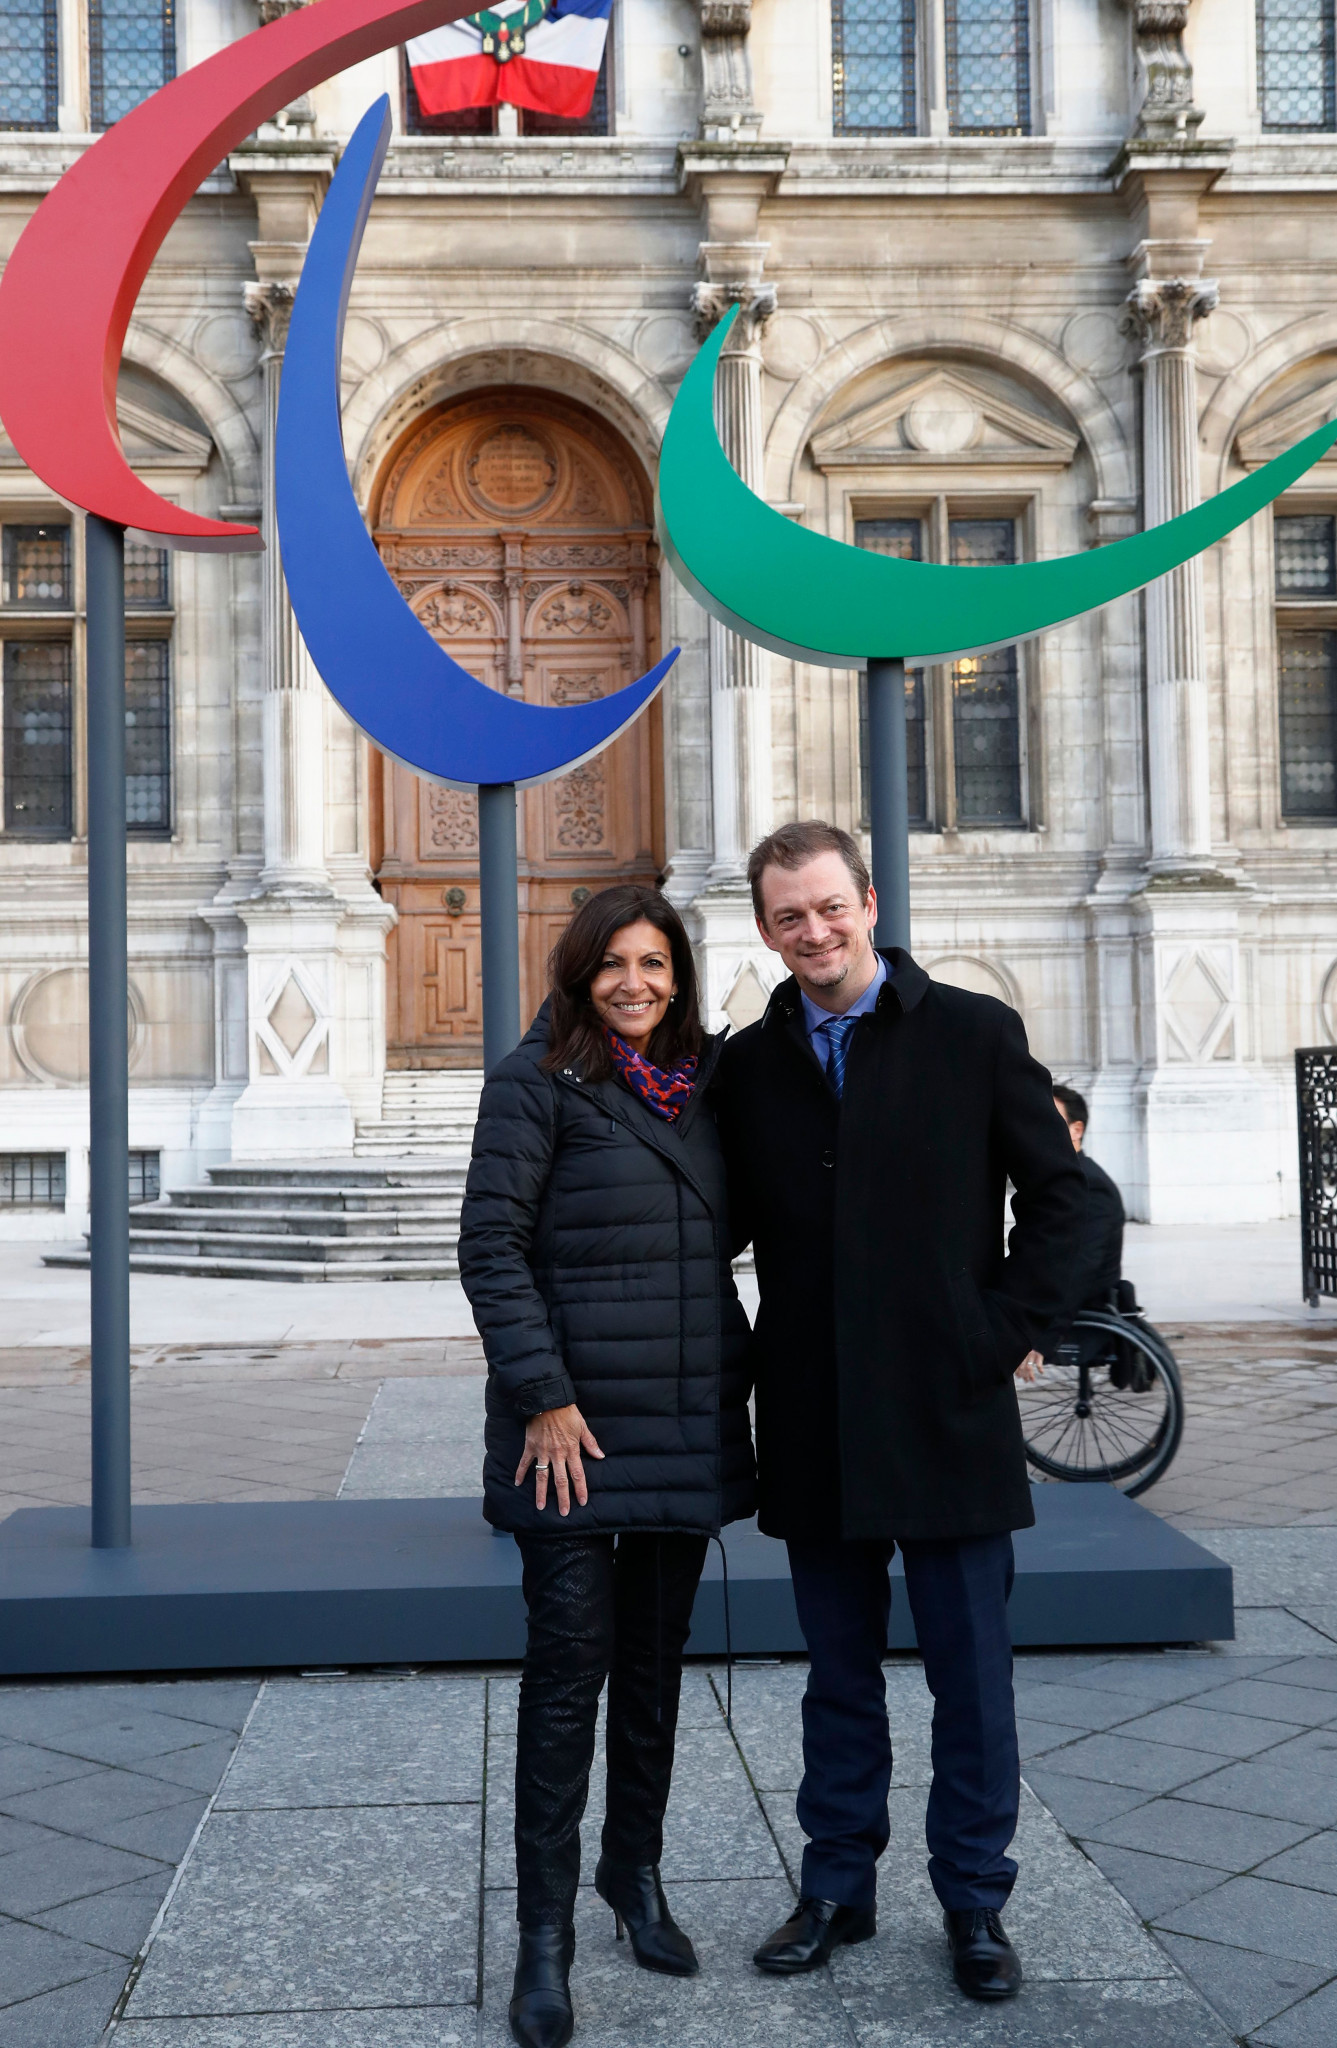 Anne Hidalgo, Mayor of Paris, and IPC President Andrew Parsons present an entente cordiale outside the Hotel de Ville in Paris where they discussed the French capital hosting the 2024 Paralympic Games ©Getty Images